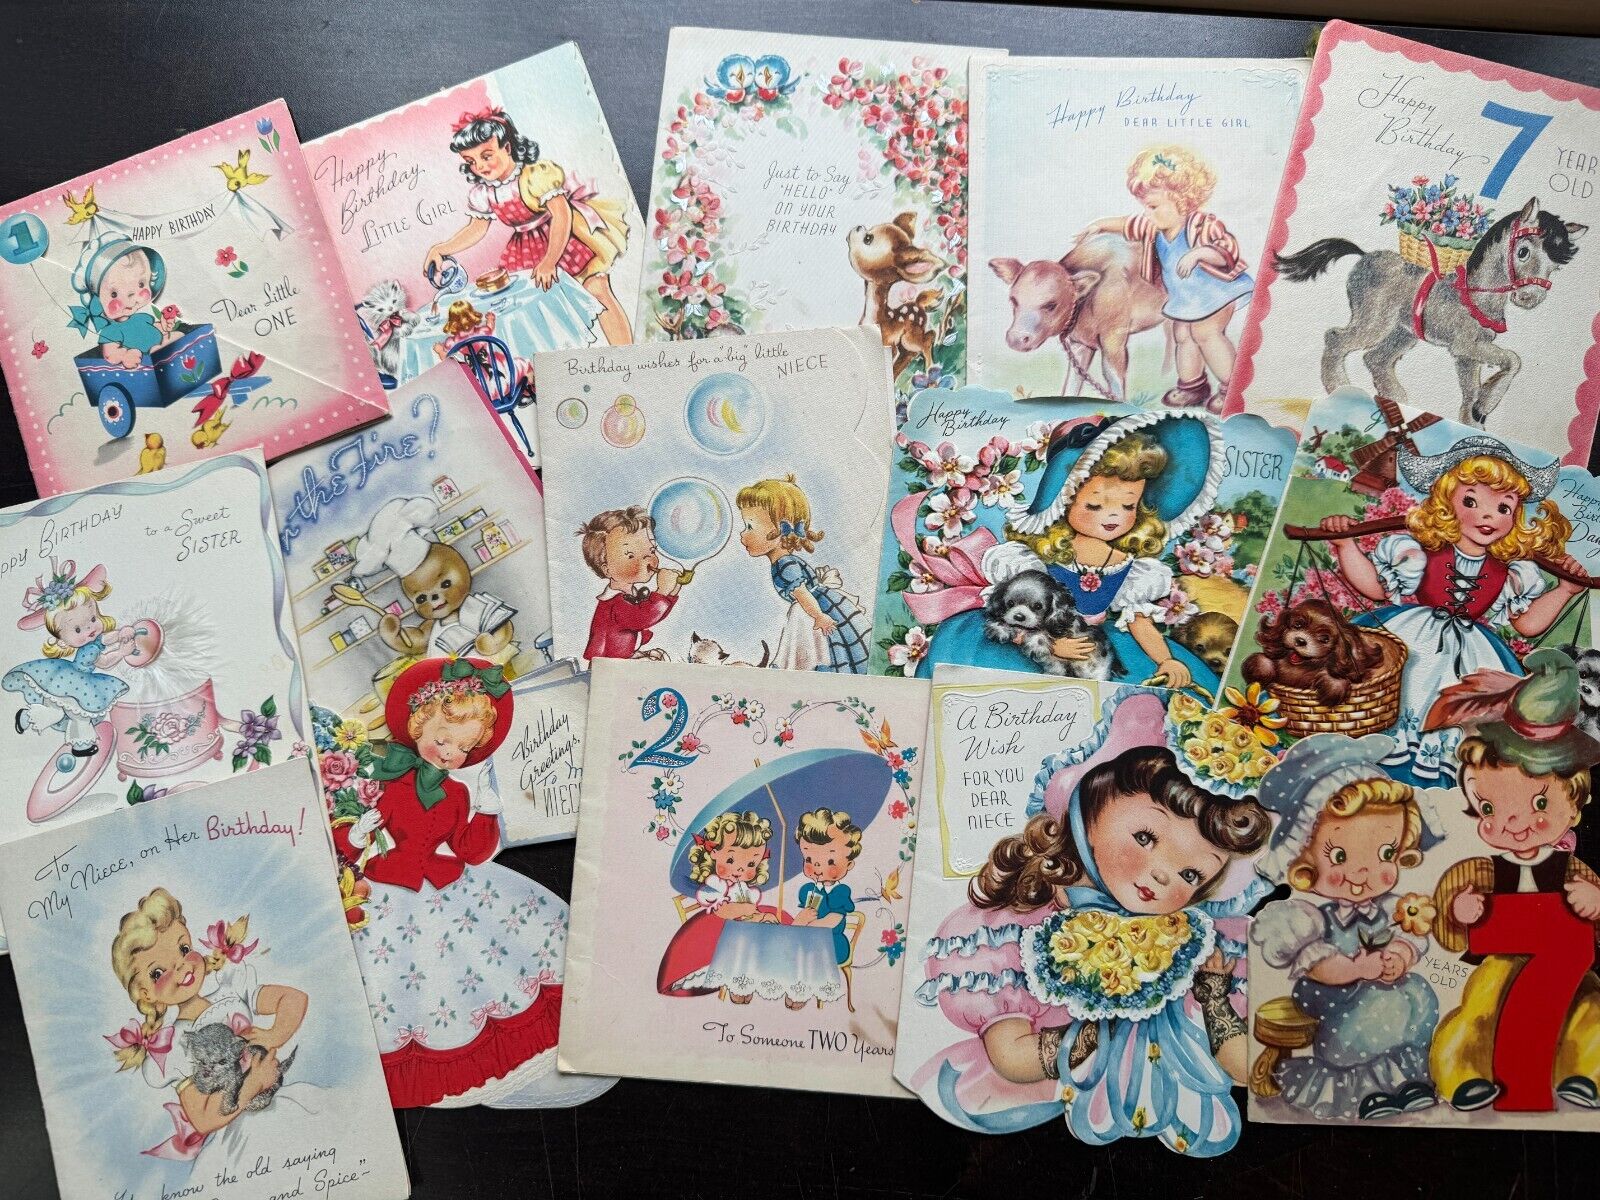 Lot of 70 Vintage 1940s/1950s Child\'s Birthday Cards - Adorable Artwork